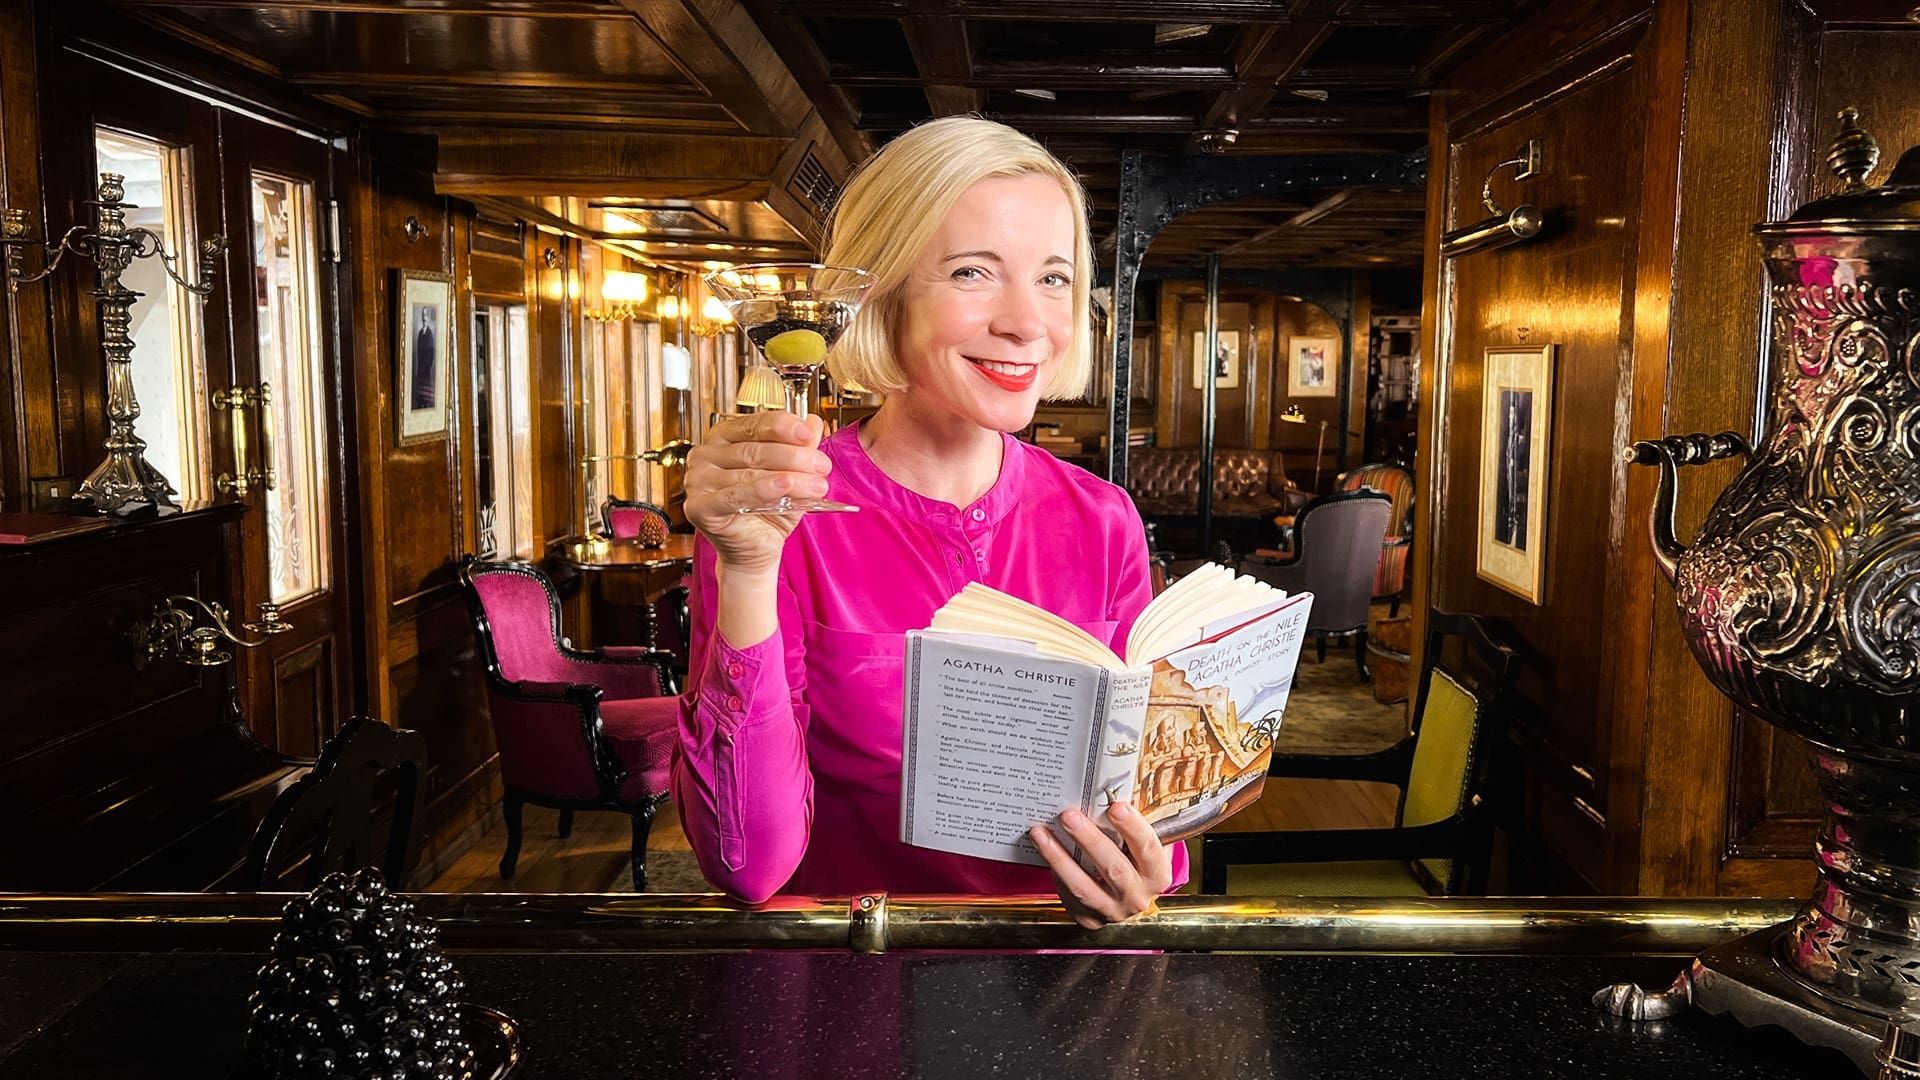 Agatha Christie: Lucy Worsley on the Mystery Queen background